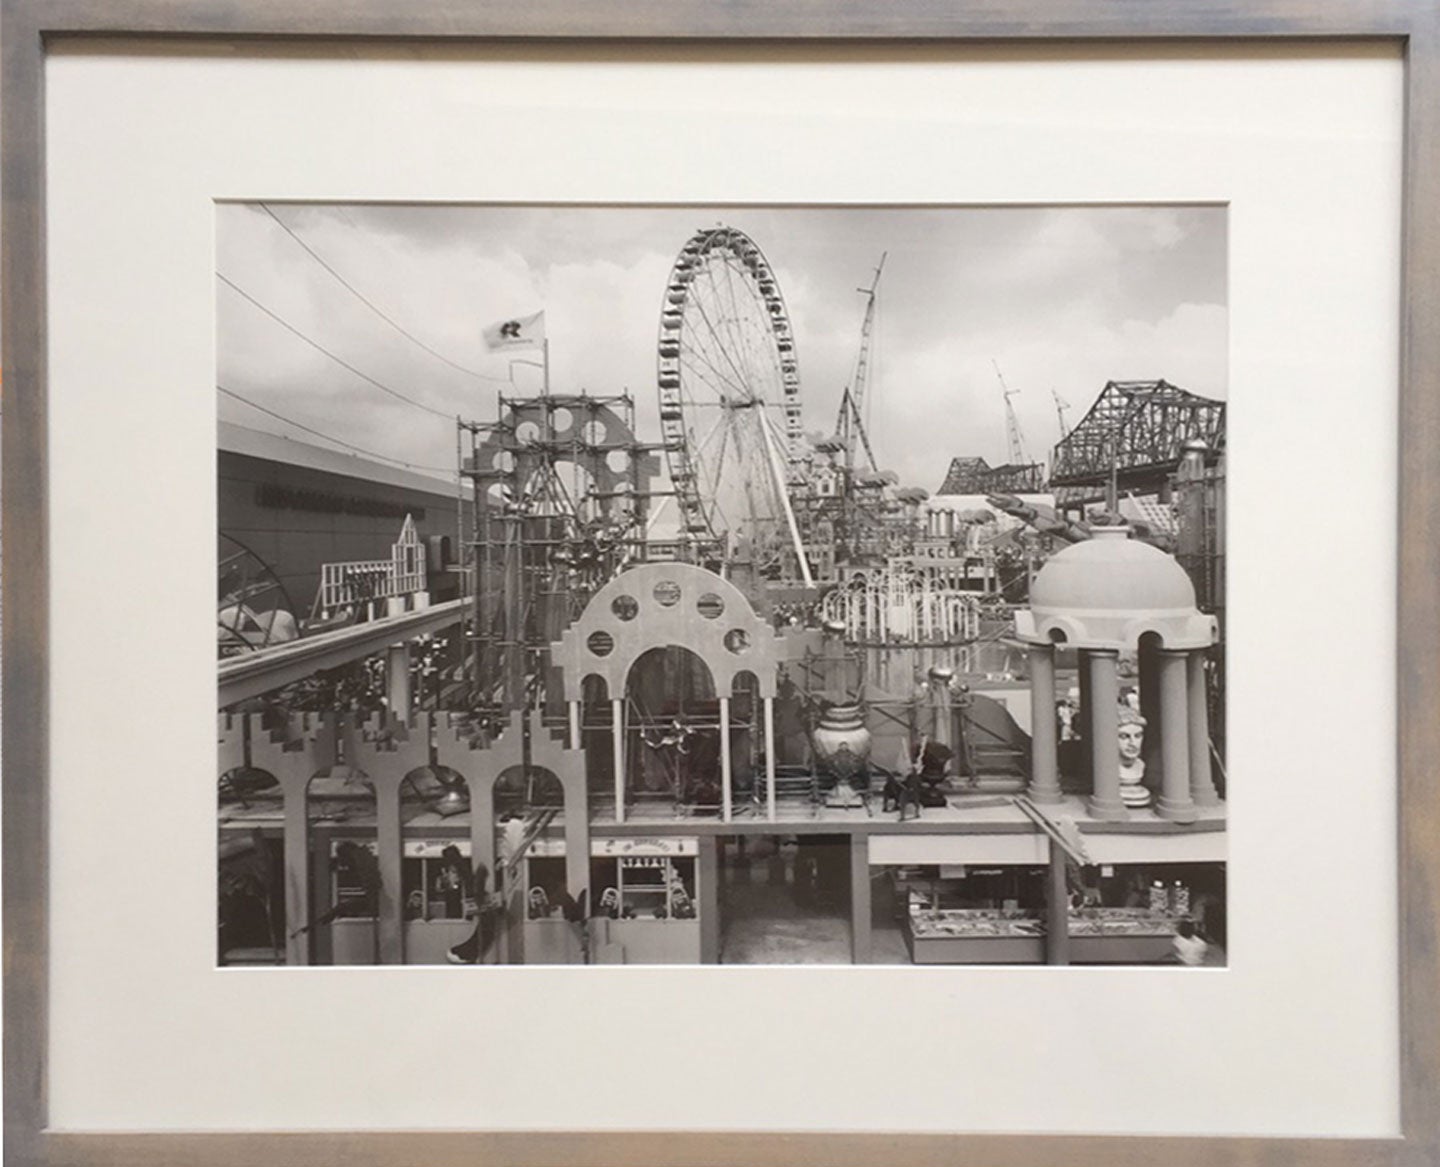 Catherine Wagner: "Louisiana World Exposition, Wonderwall, New Orleans, 1984," Limited Edition Vintage Gelatin Silver Print (Framed)